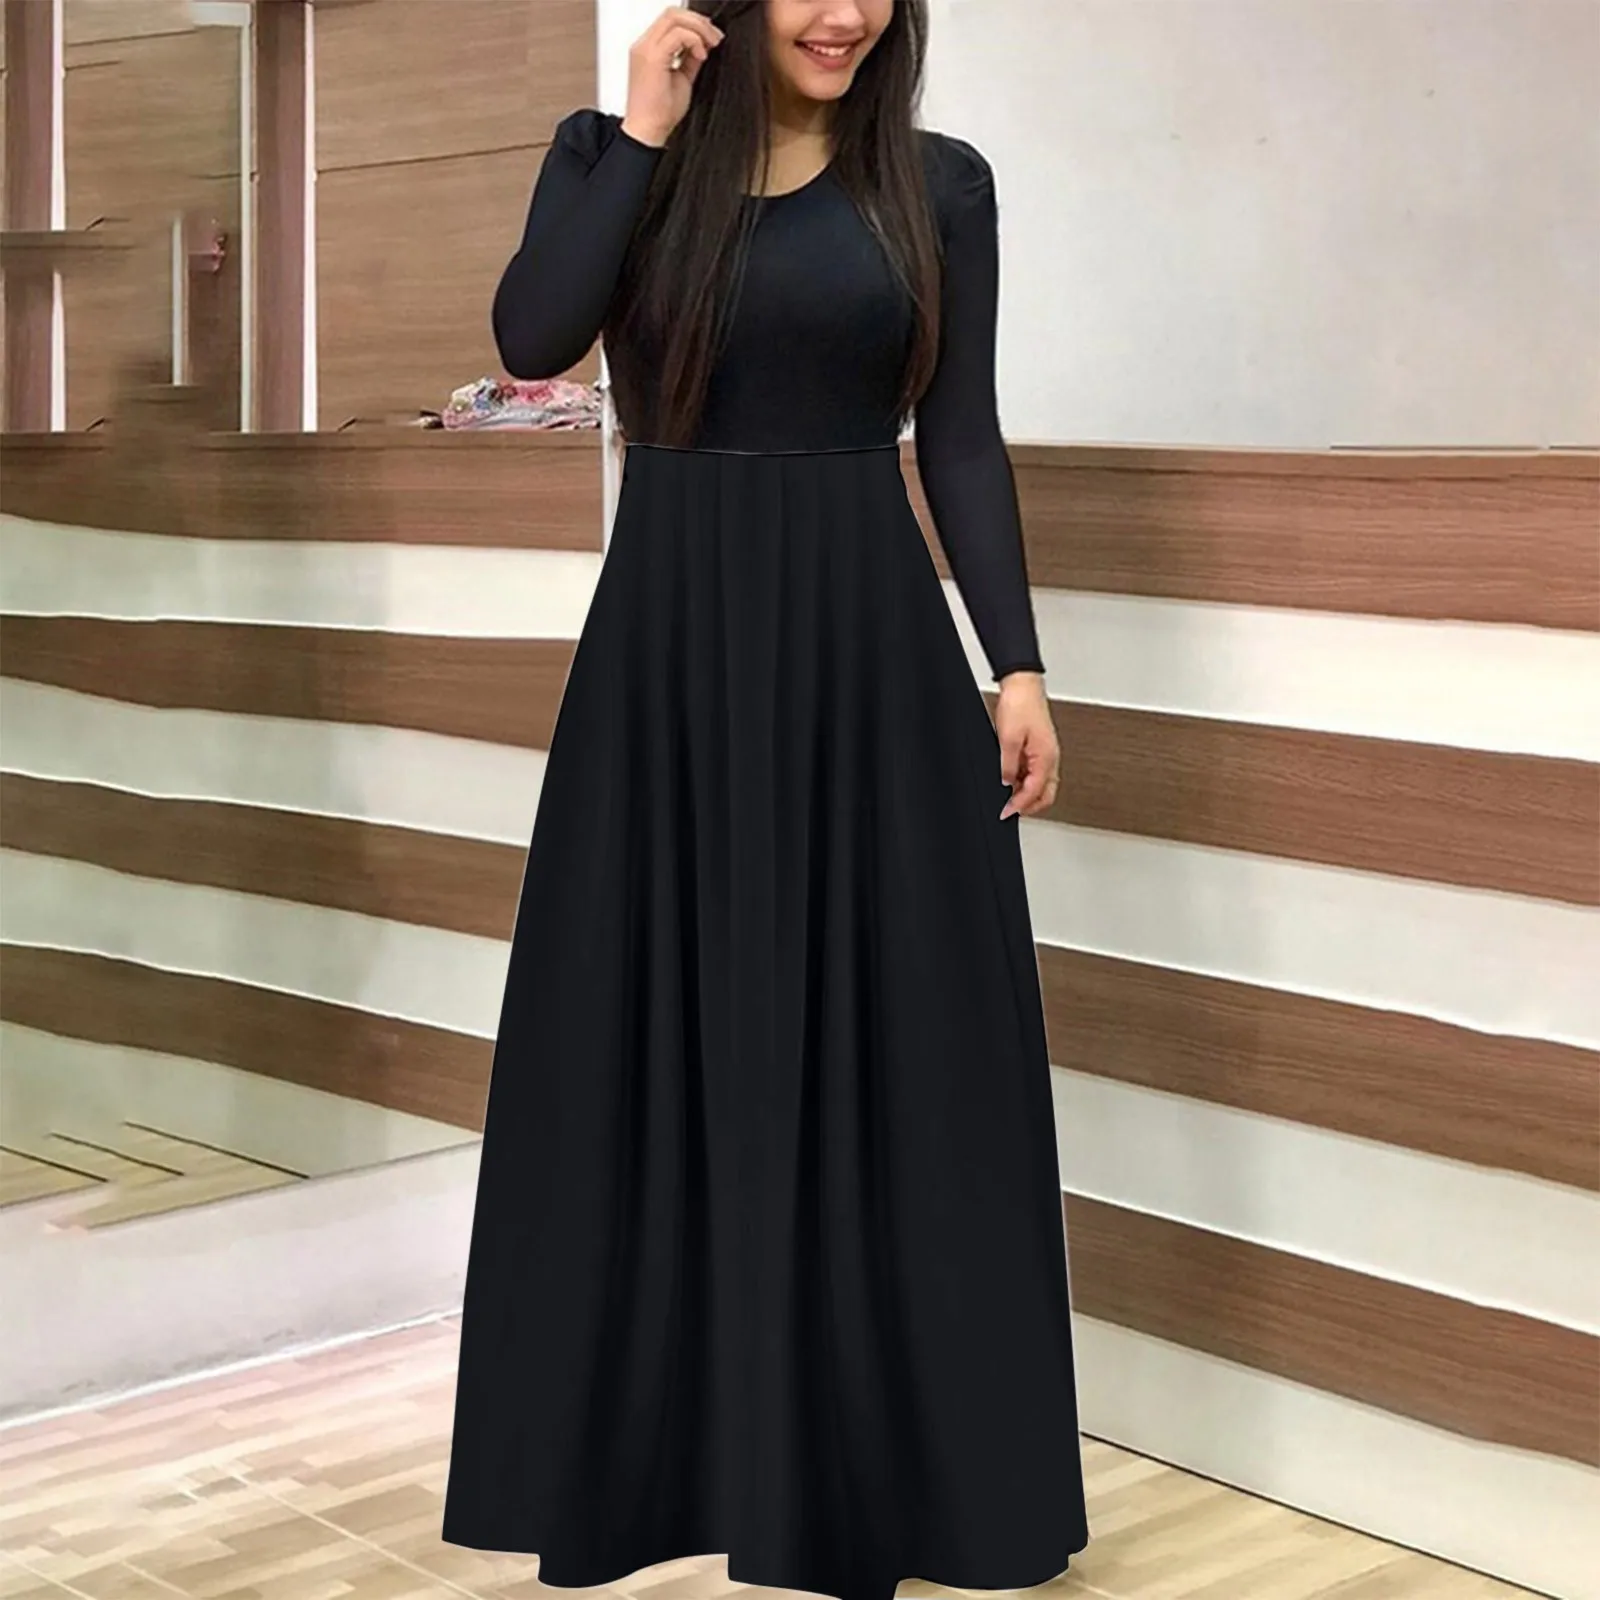 

Women Sexy Long Sleeve Skeleton Soild Cocktail Party Elegant Casual Fashion Evening Party Long Dress